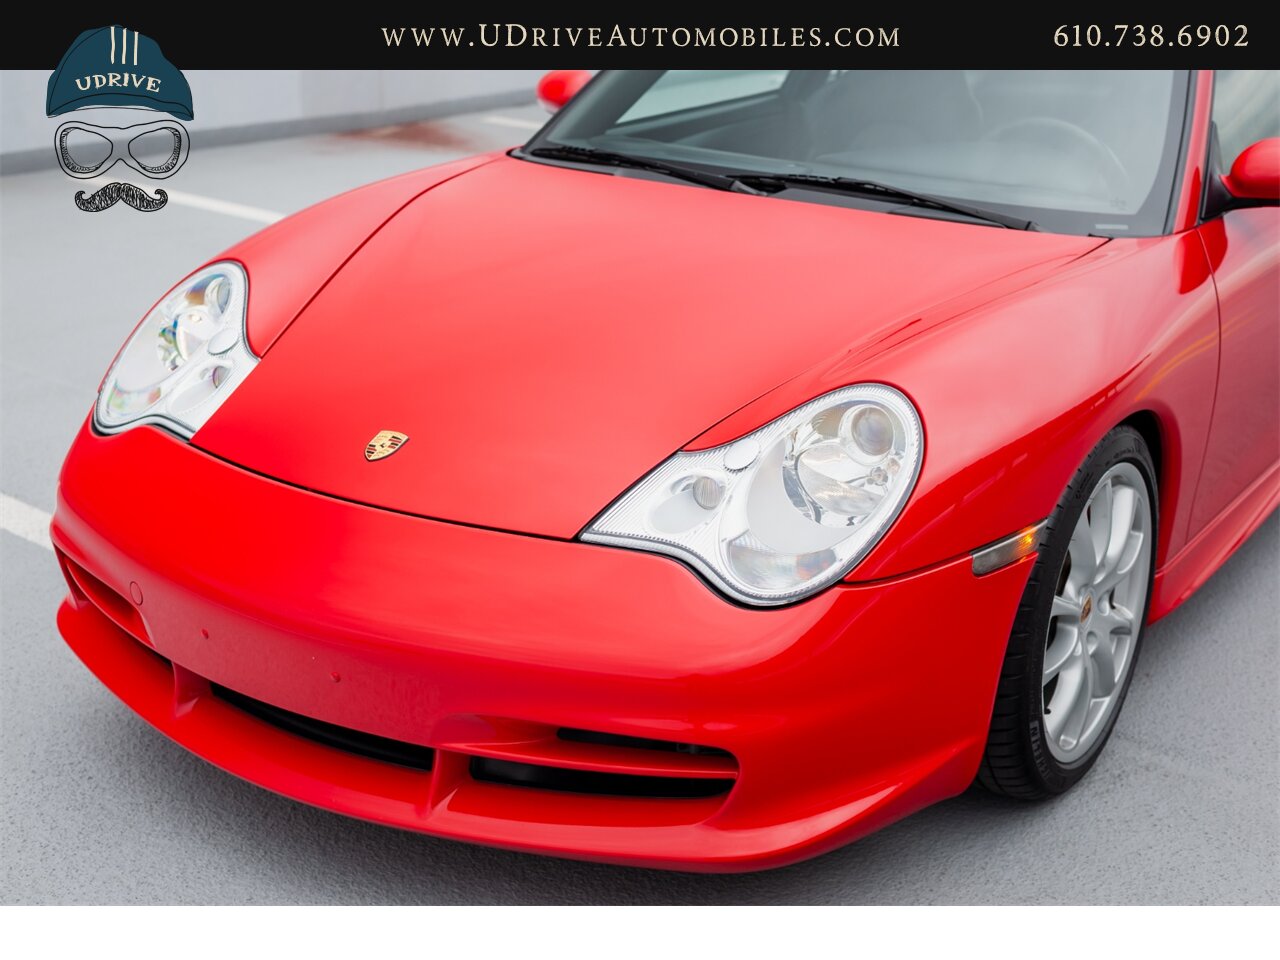 2004 Porsche 911 996 GT3 Guards Red Sport Seats Painted Hardbacks  Painted Center Console 18k Miles - Photo 12 - West Chester, PA 19382